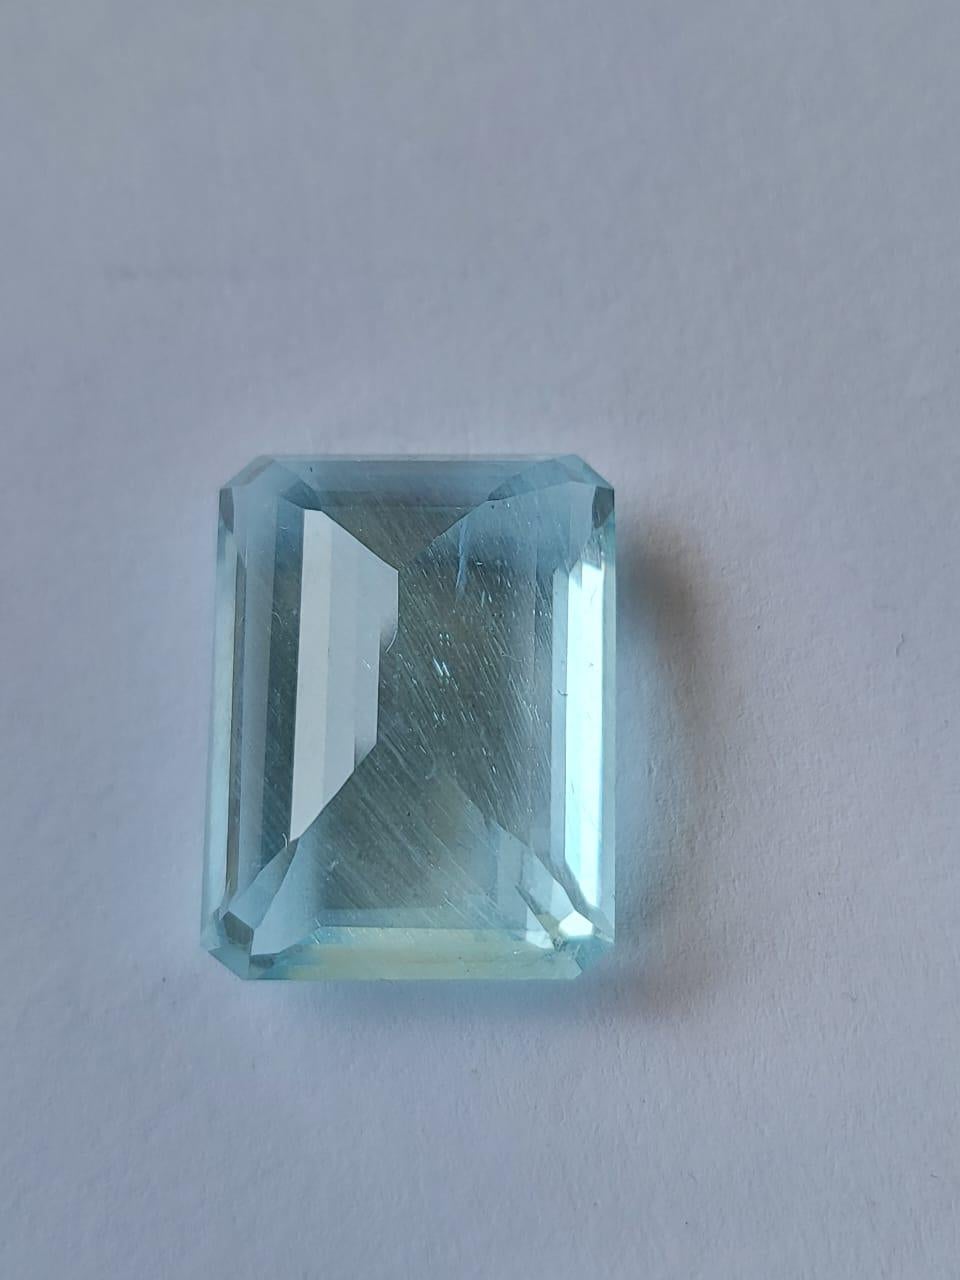 Natural Blue Aquamarine Gemstone.
31.06 Carat with a elegant blue color and excellent clarity. Also has an excellent fancy Octagon cut with ideal polish to show great shine and color . It will look authentic in jewellery. The dimensions of the